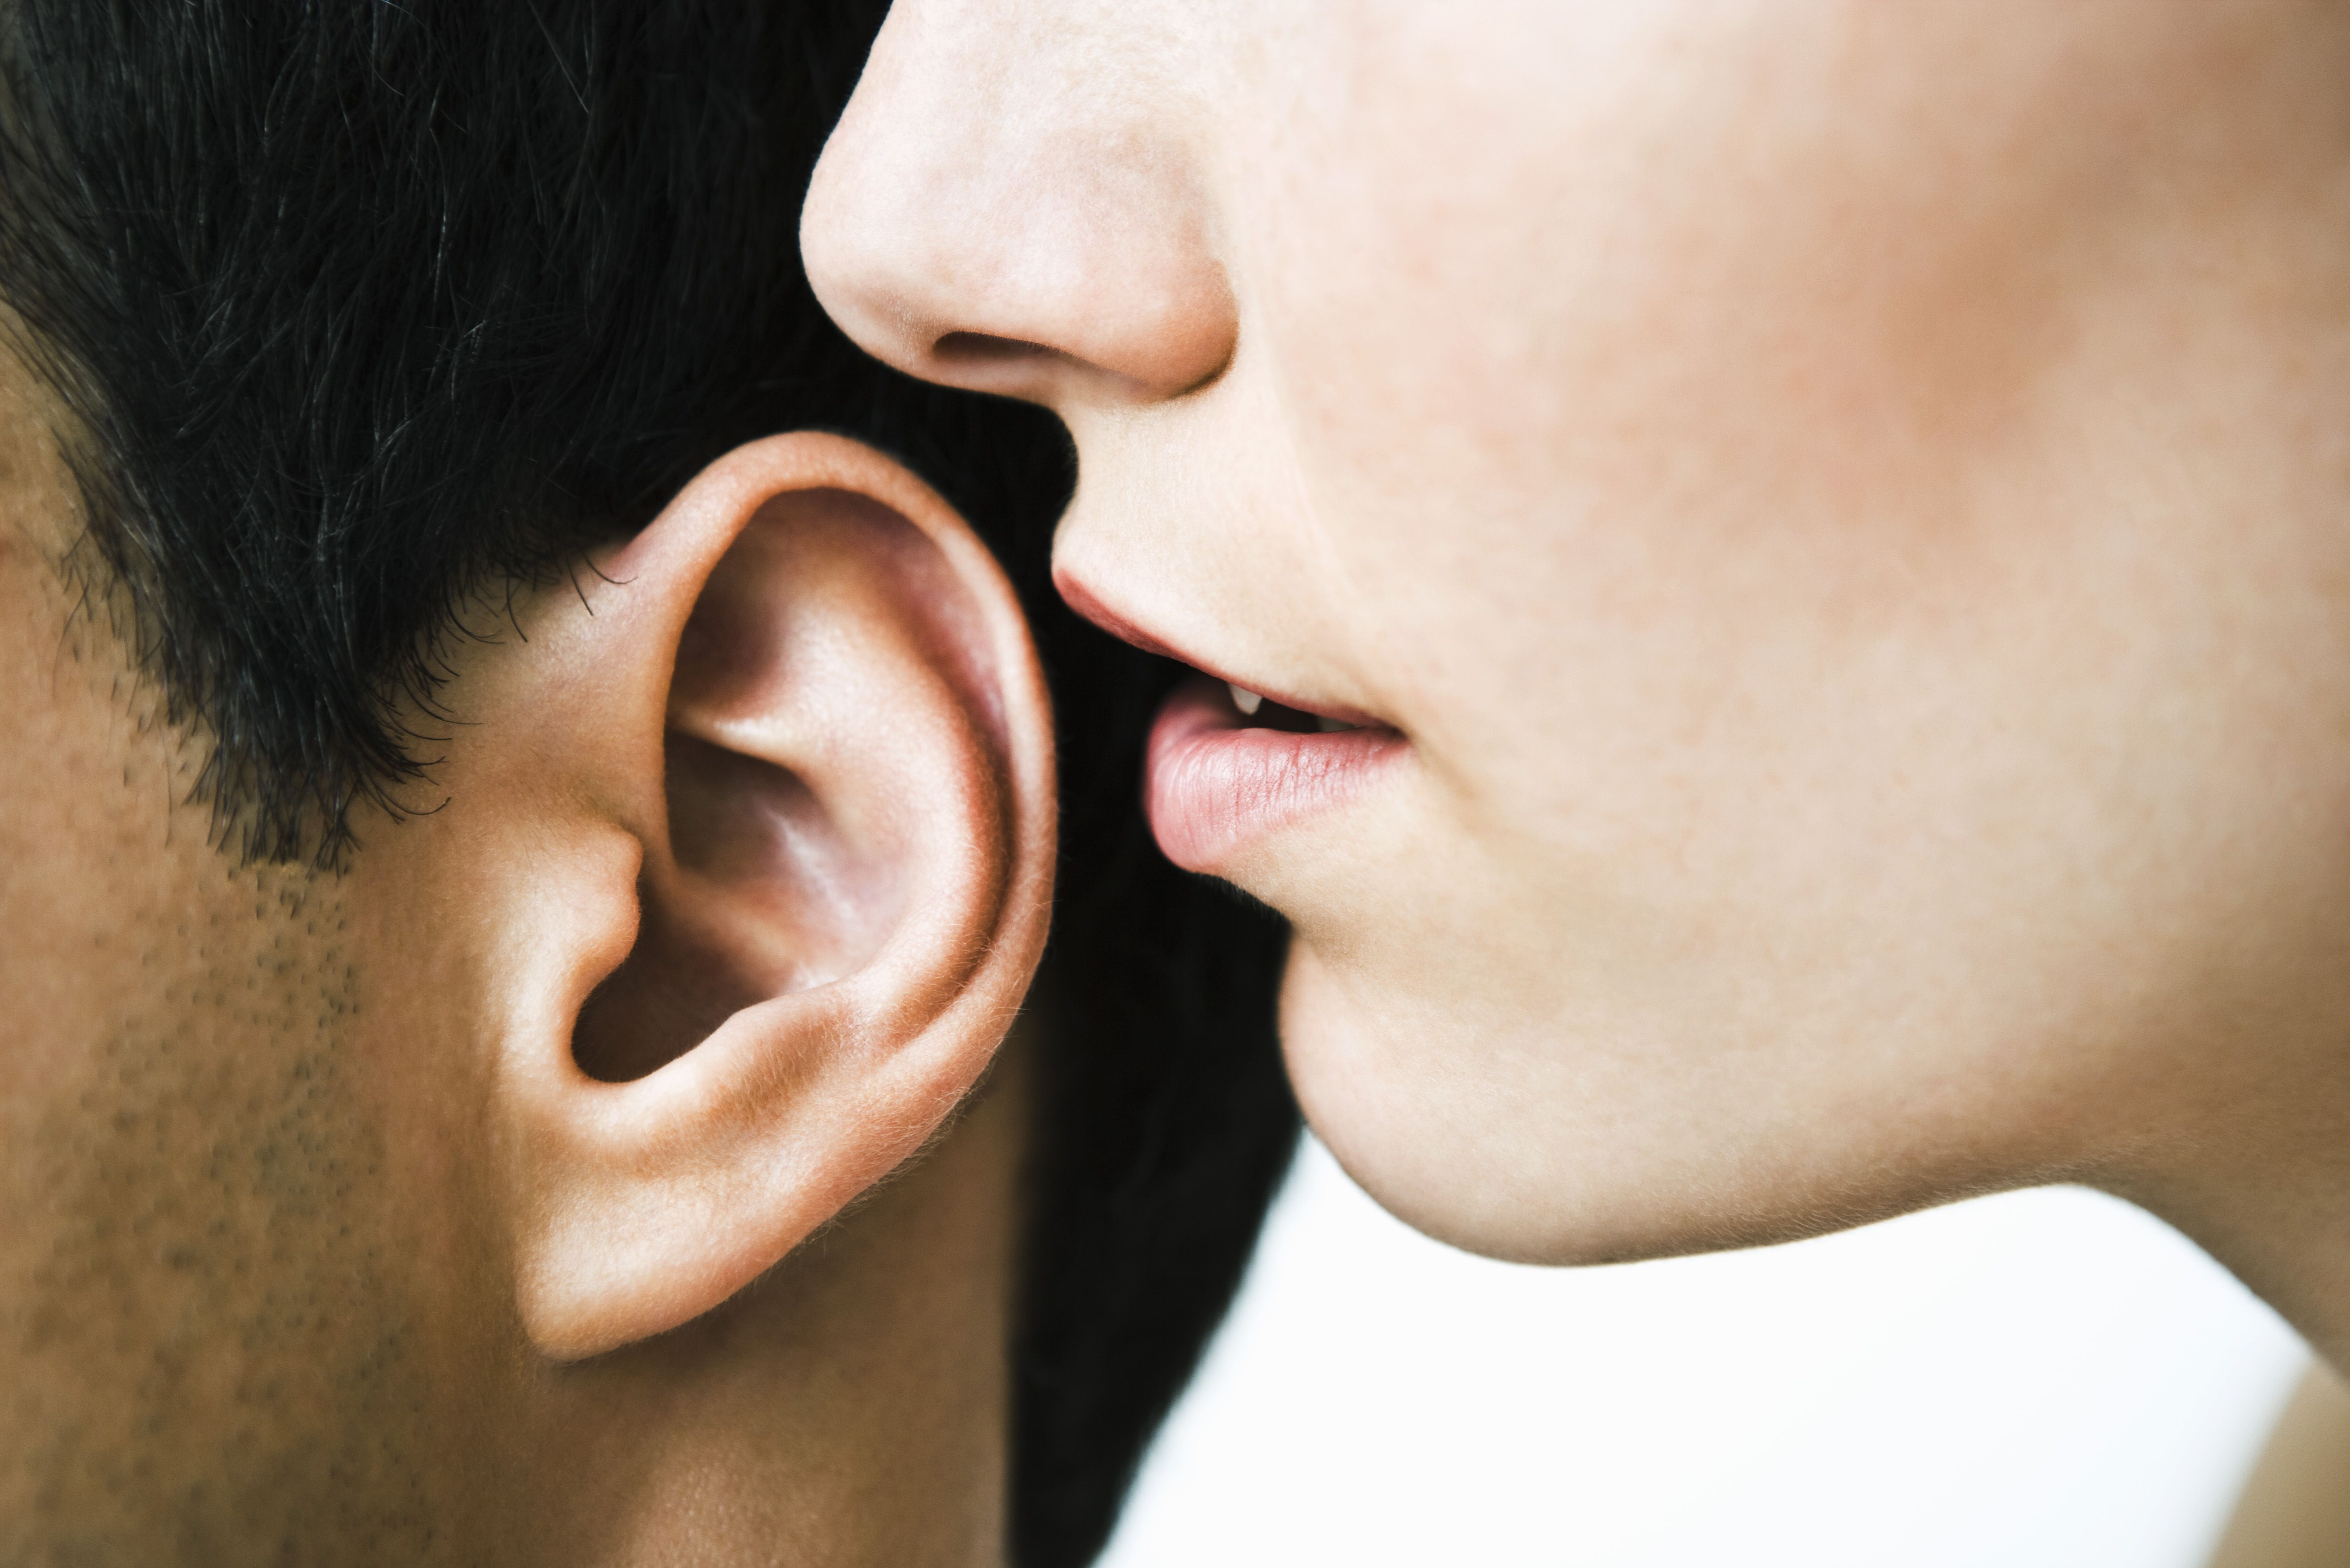 woman whispering in man's ear, close up